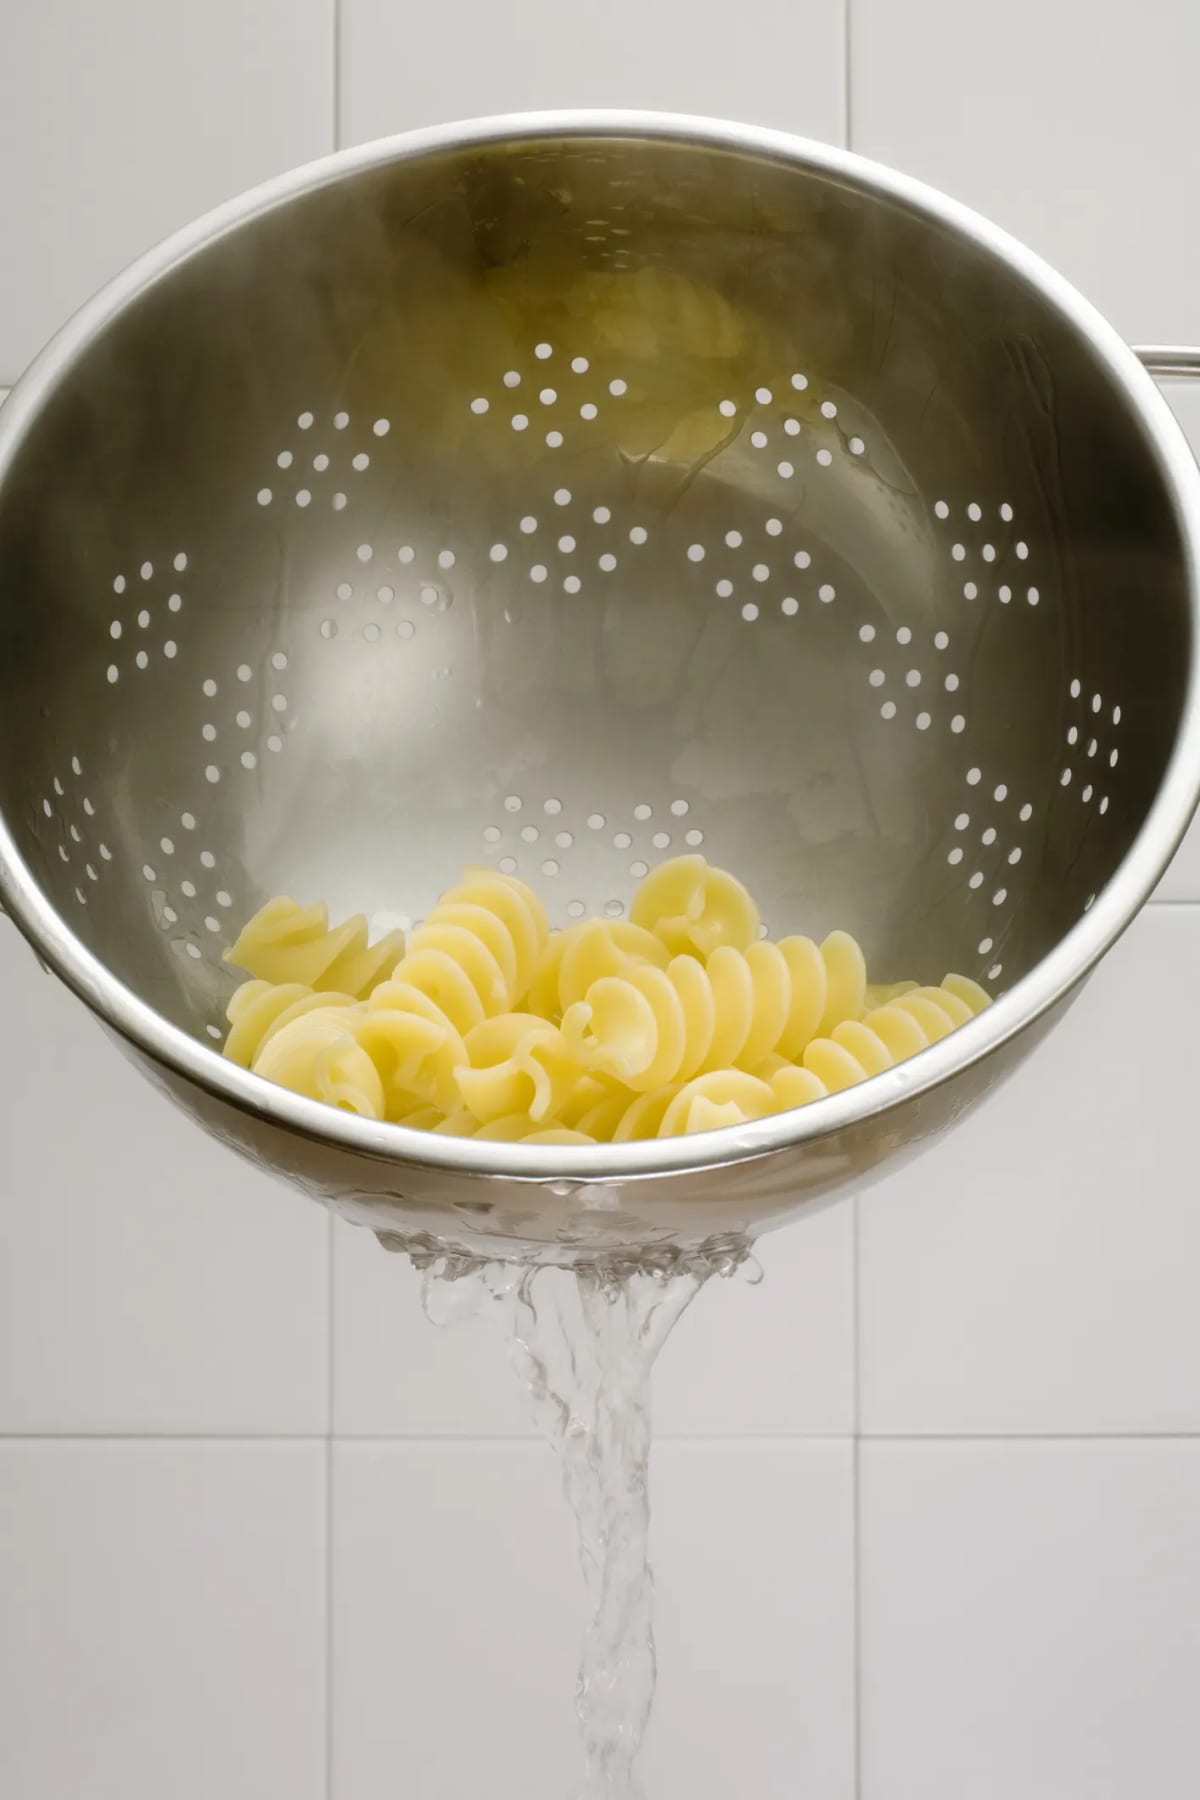 Pasta Water Being Strained